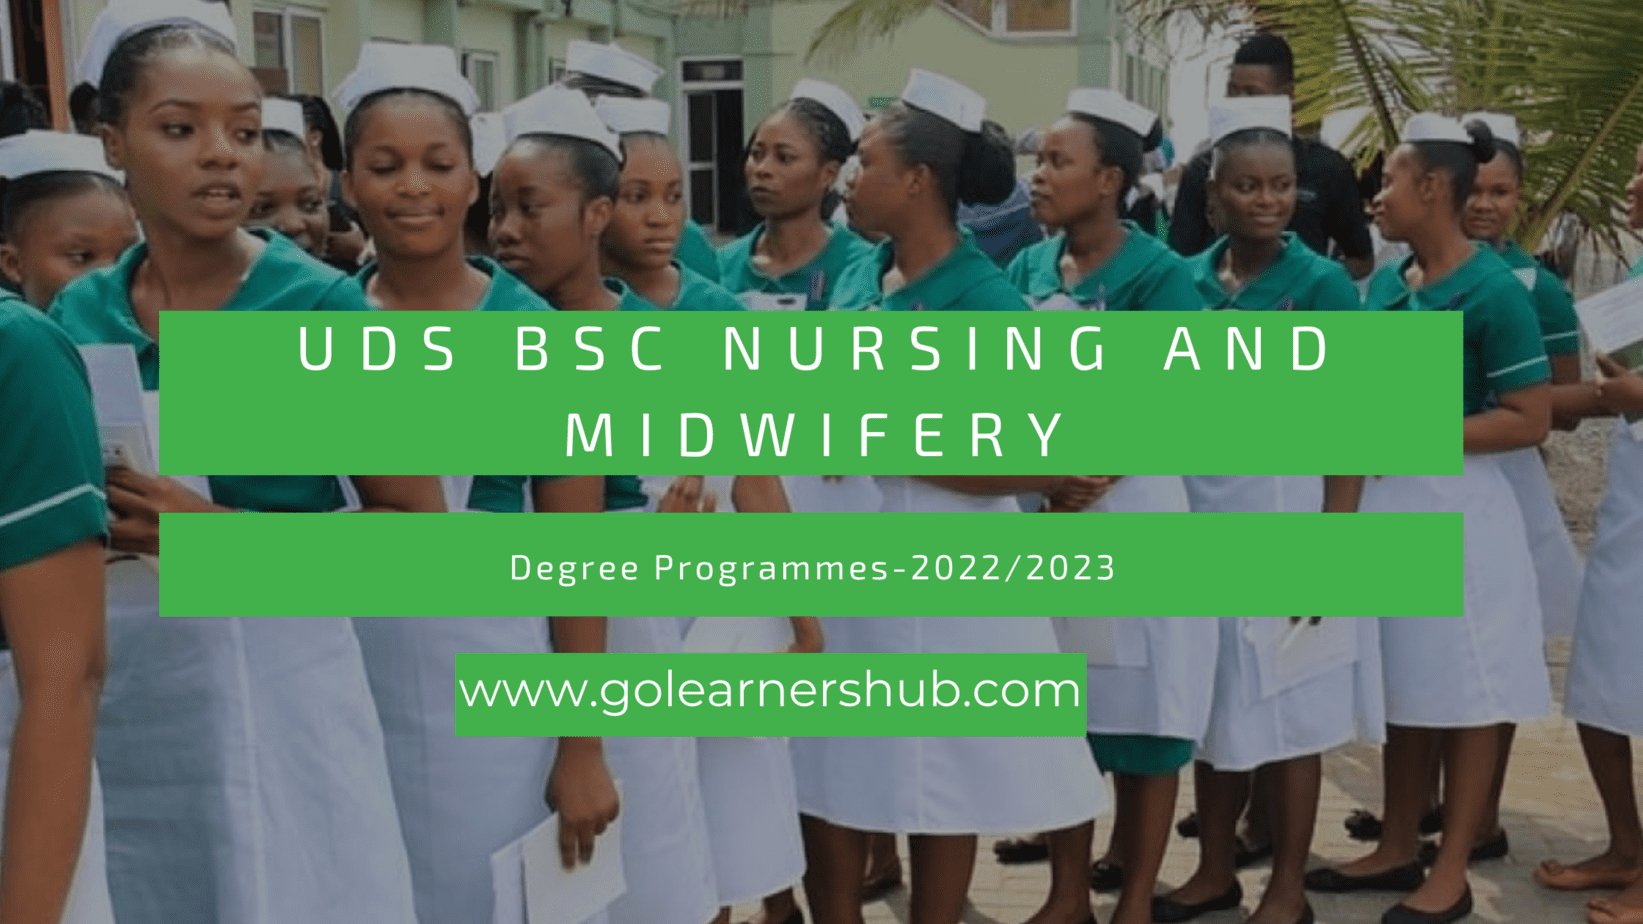 UDS Bsc Nursing and Midwifery Degree Programmes-2023/2024